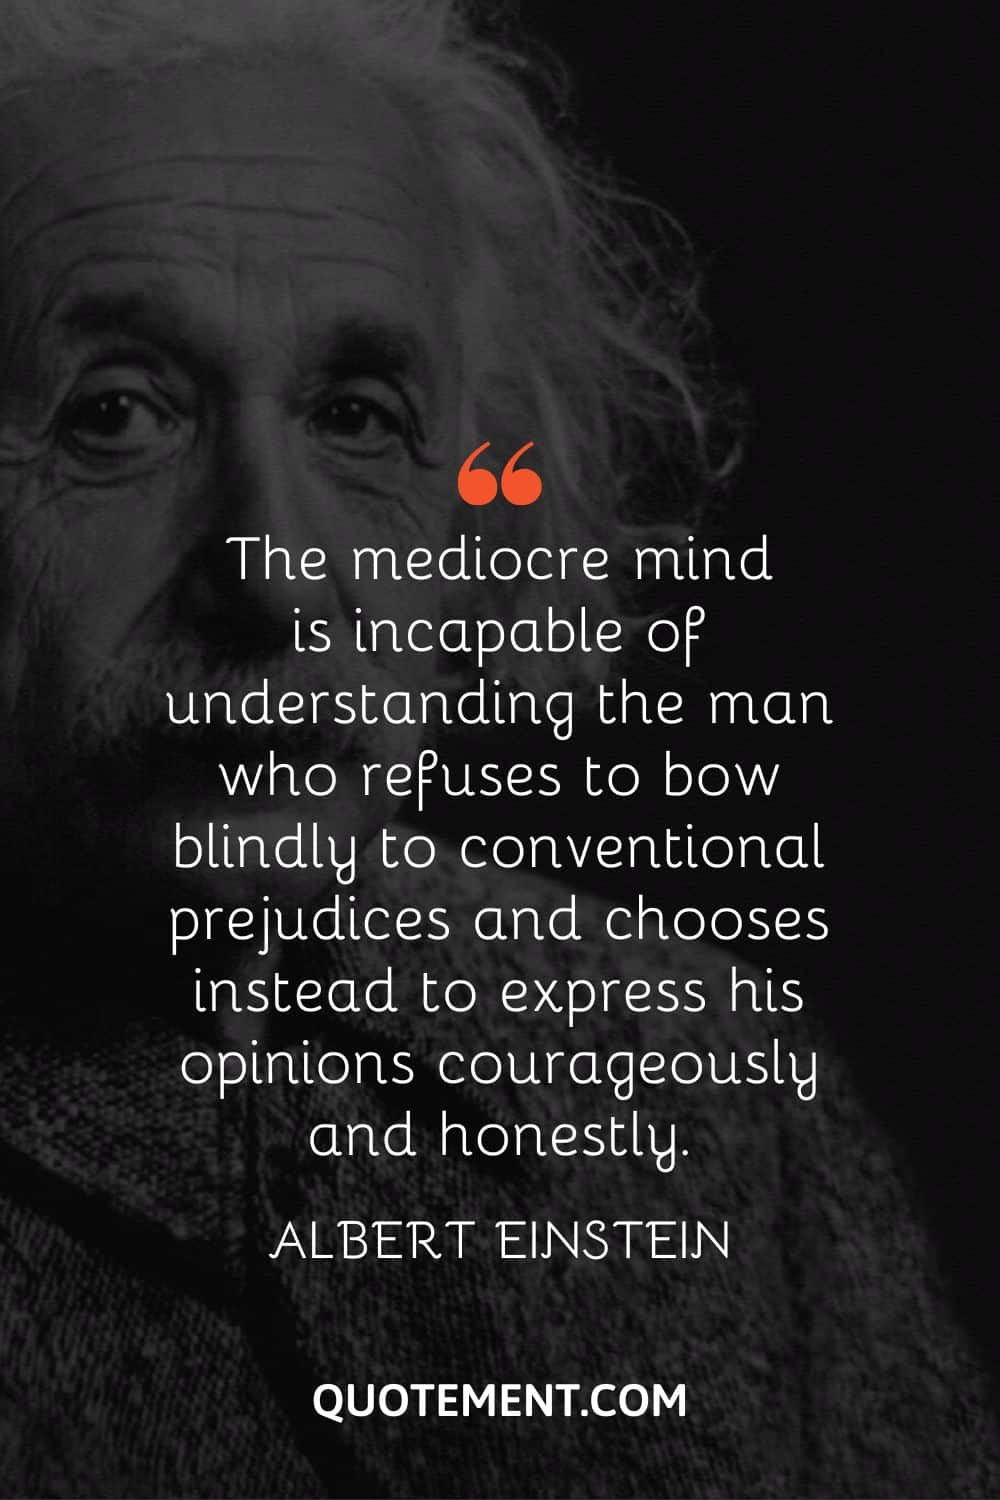 The mediocre mind is incapable of understanding the man who refuses to bow blindly to conventional prejudices